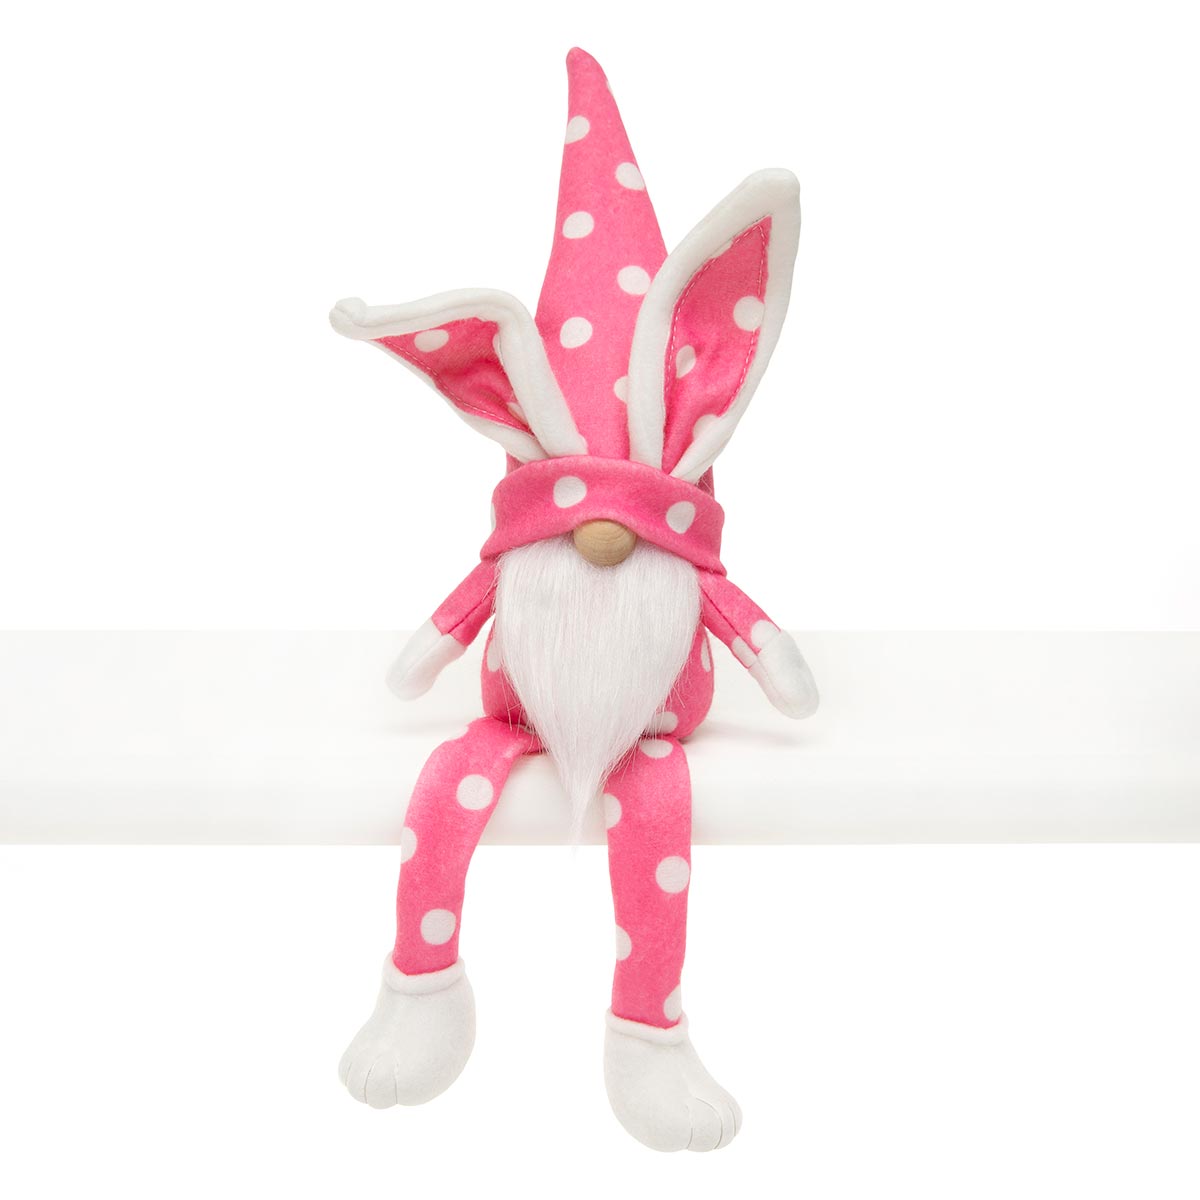 B50 SASSY POLKA DOT BUNNY GNOME PINK/WHITE WITH WIRED EARS,